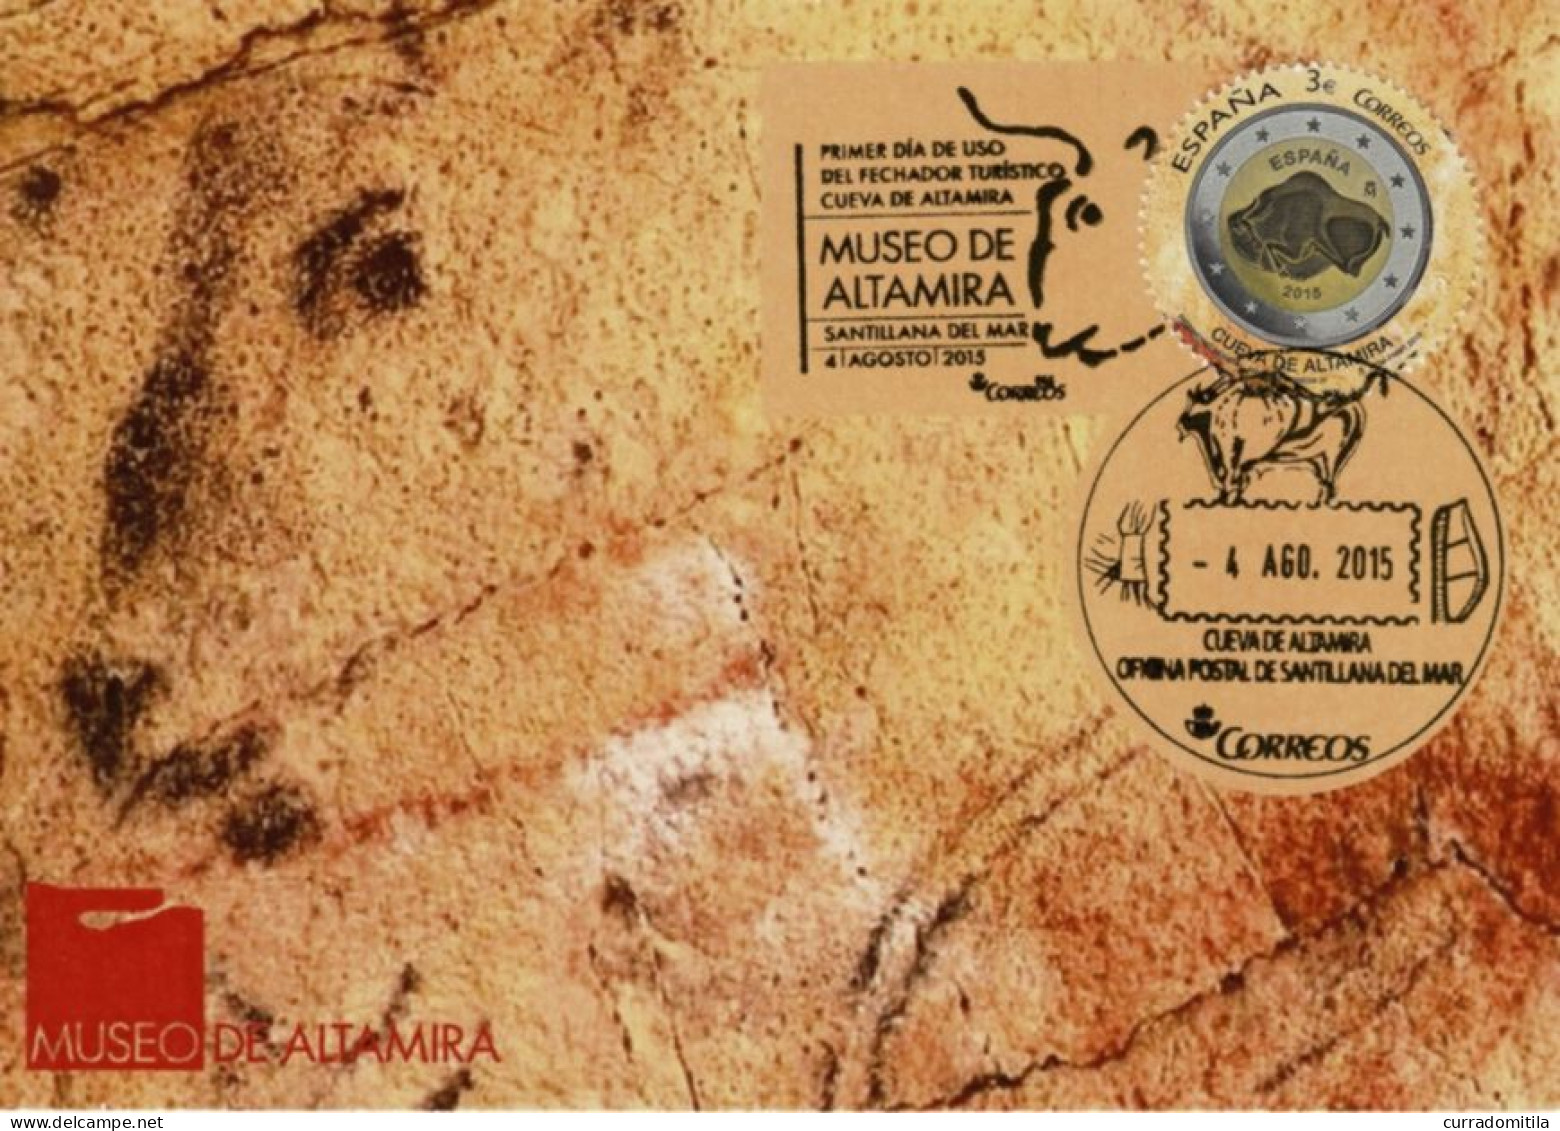 2015 Card (Large) With Rock Art Cancellations, Prehistoric Bison Of Altamita And Special Stamp Of Altamira - Archeologie